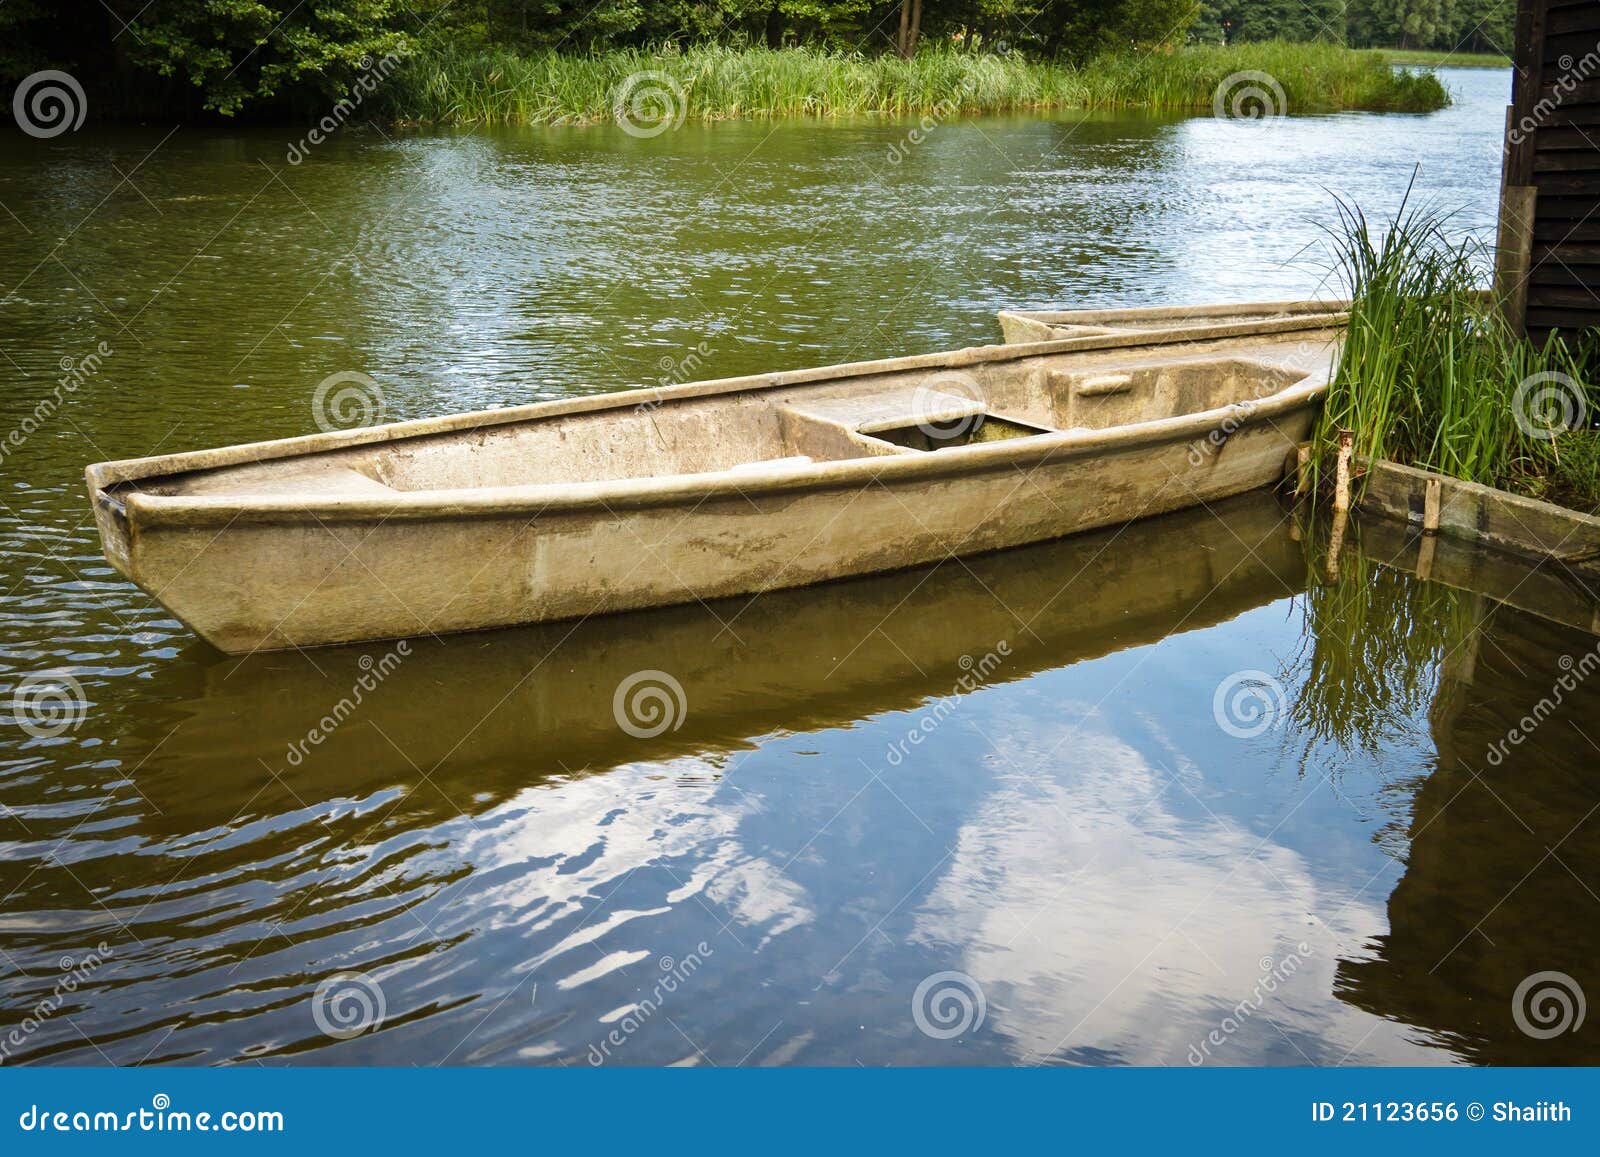 Vintage Fishing Boat In The Lake Royalty Free Stock Image - Image 